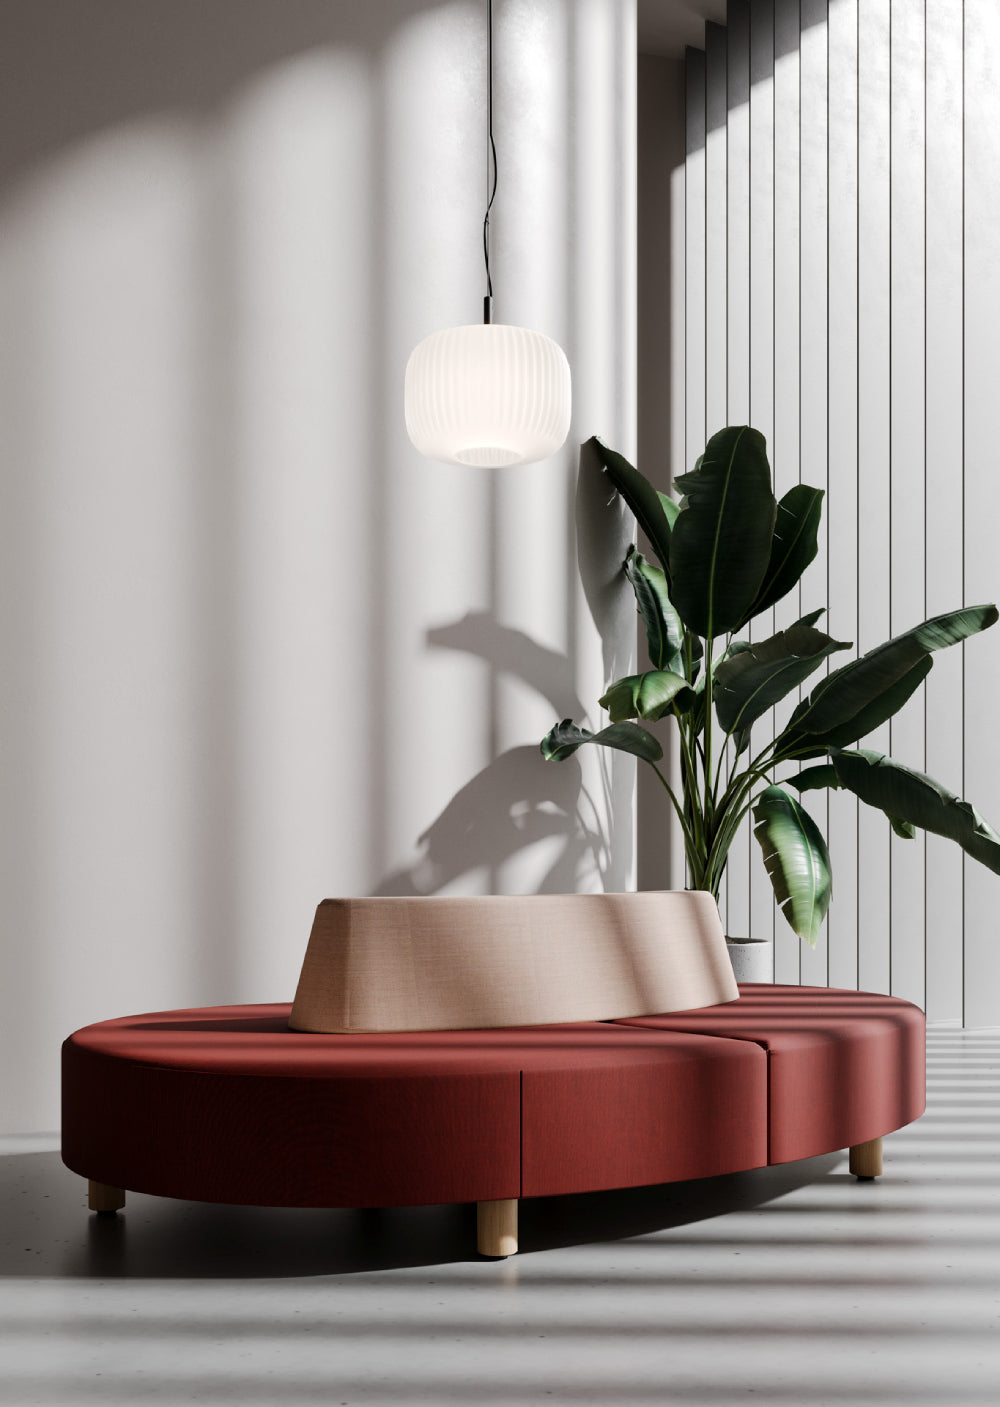 Nubi Upholstered Modular Sofa with Indoor Plant and Ceiling Light in Reception Setting